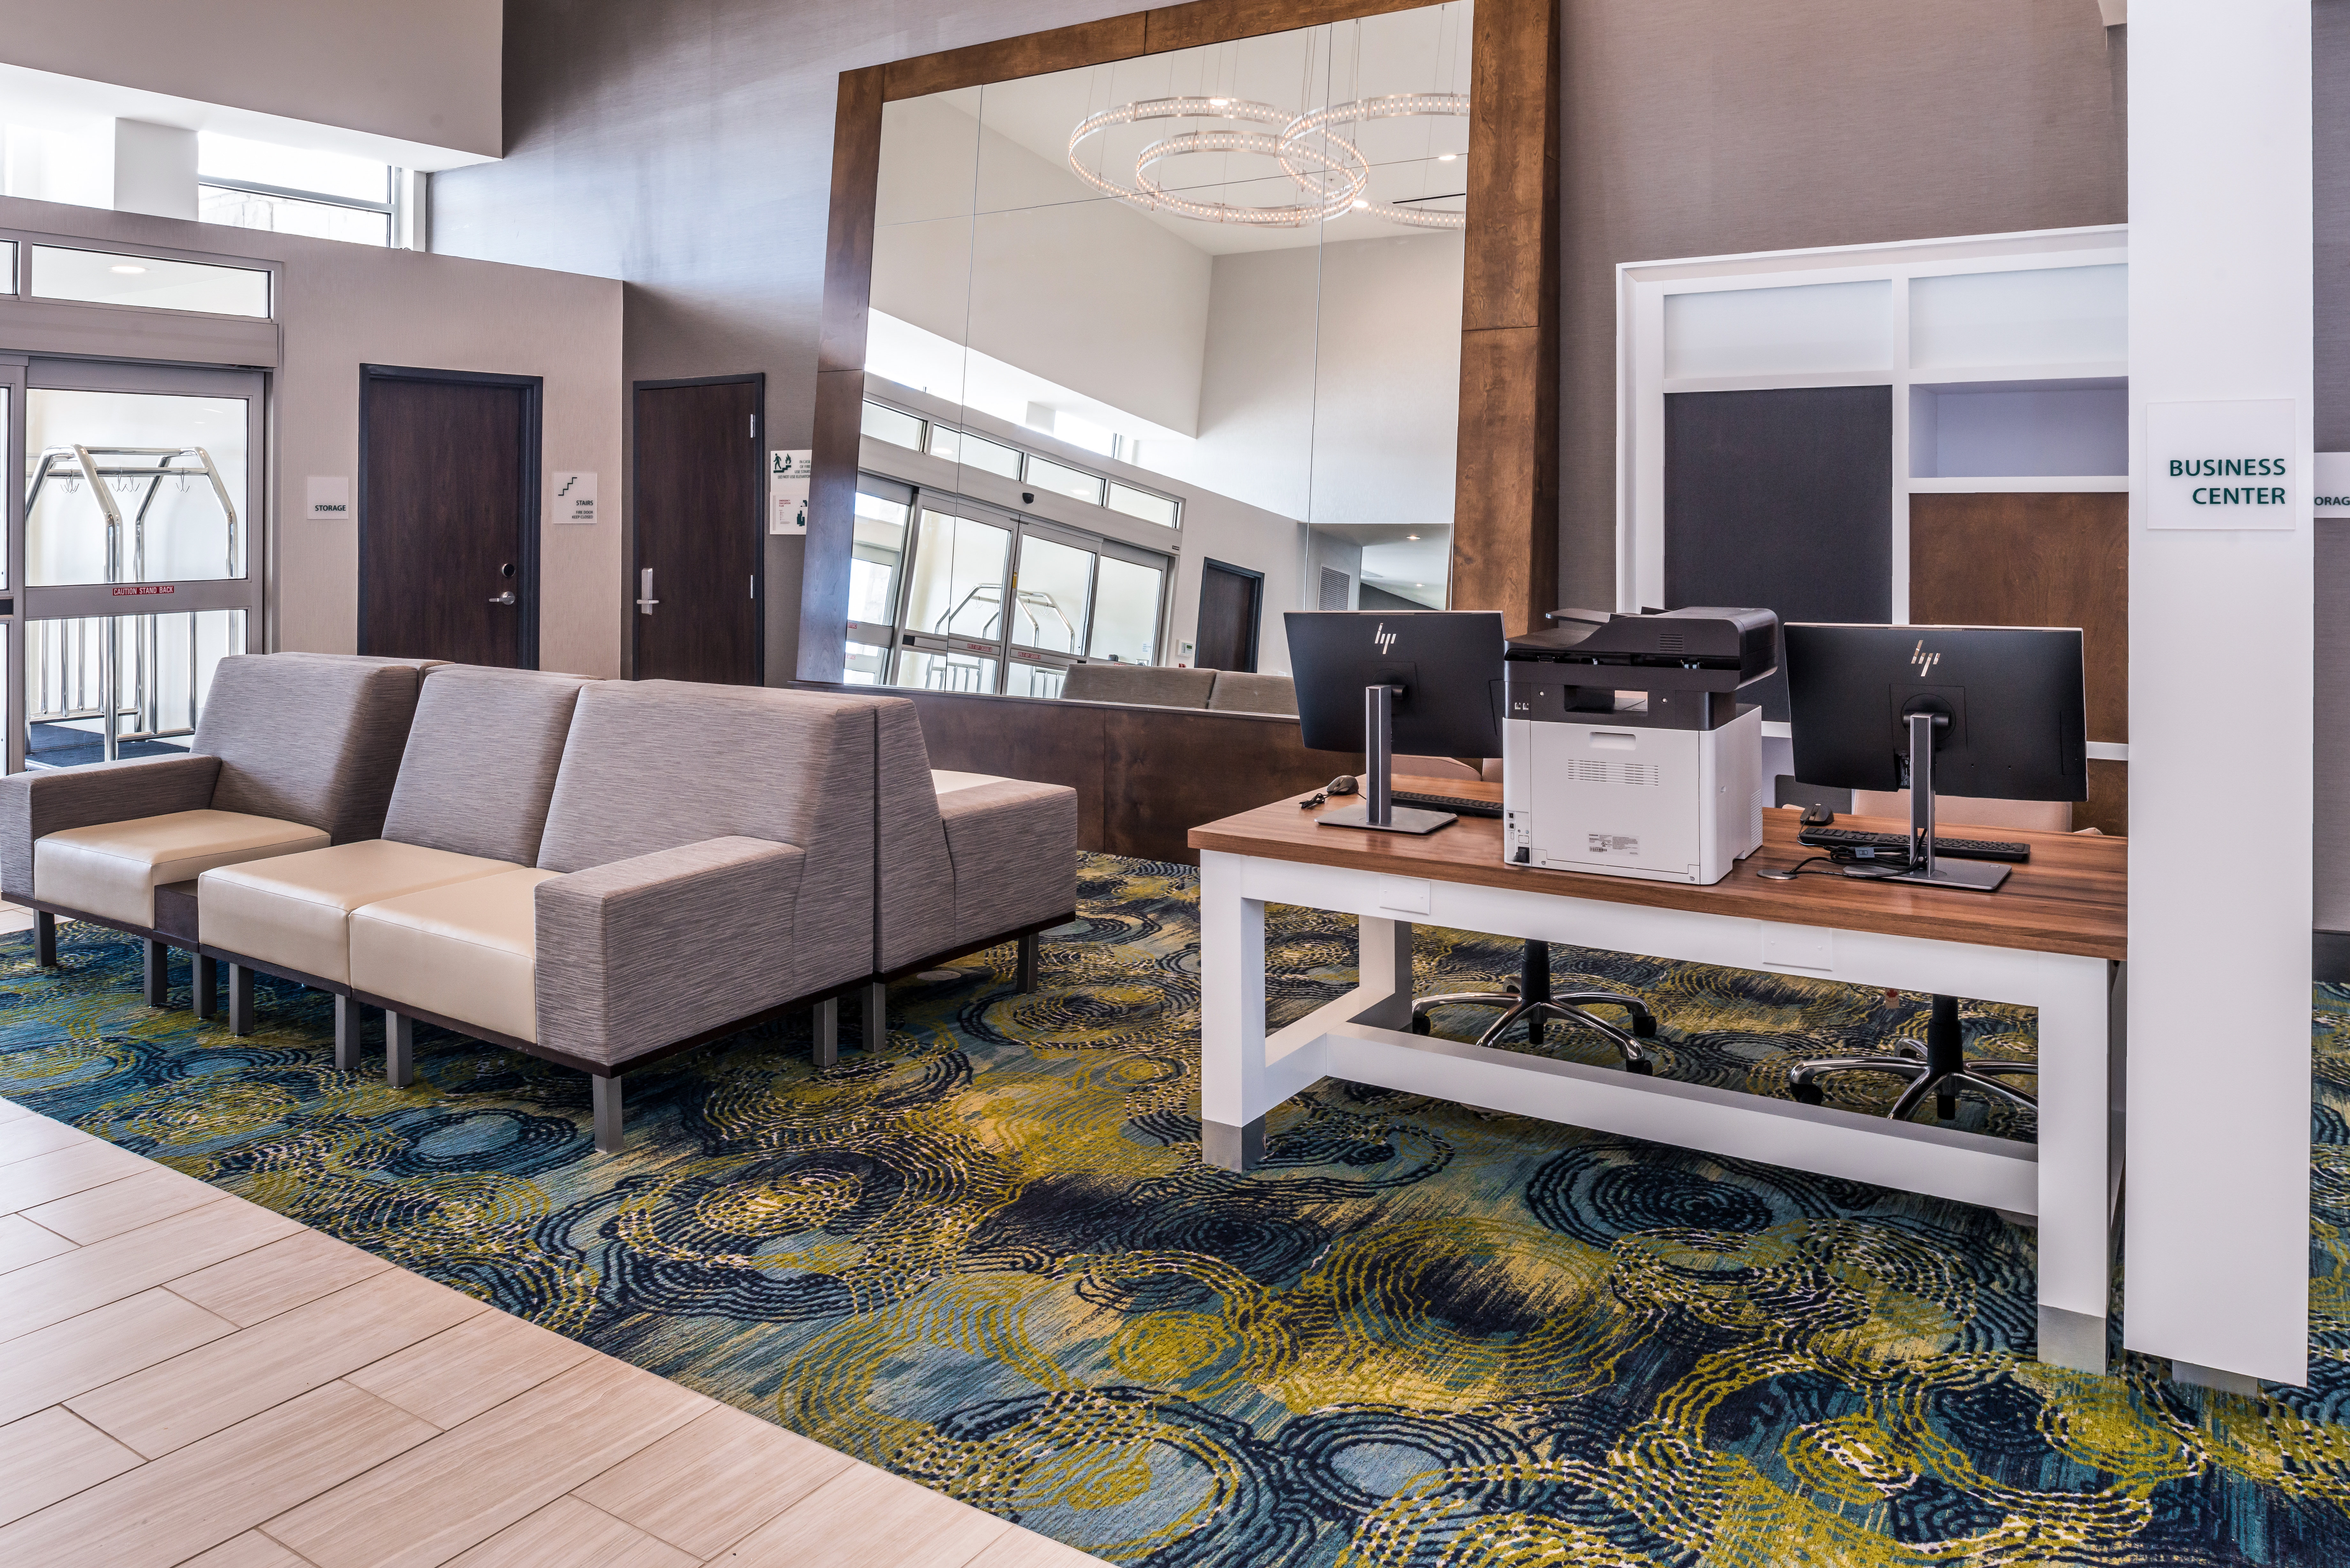 Business Center located in the lobby with free Wi-Fi access. 